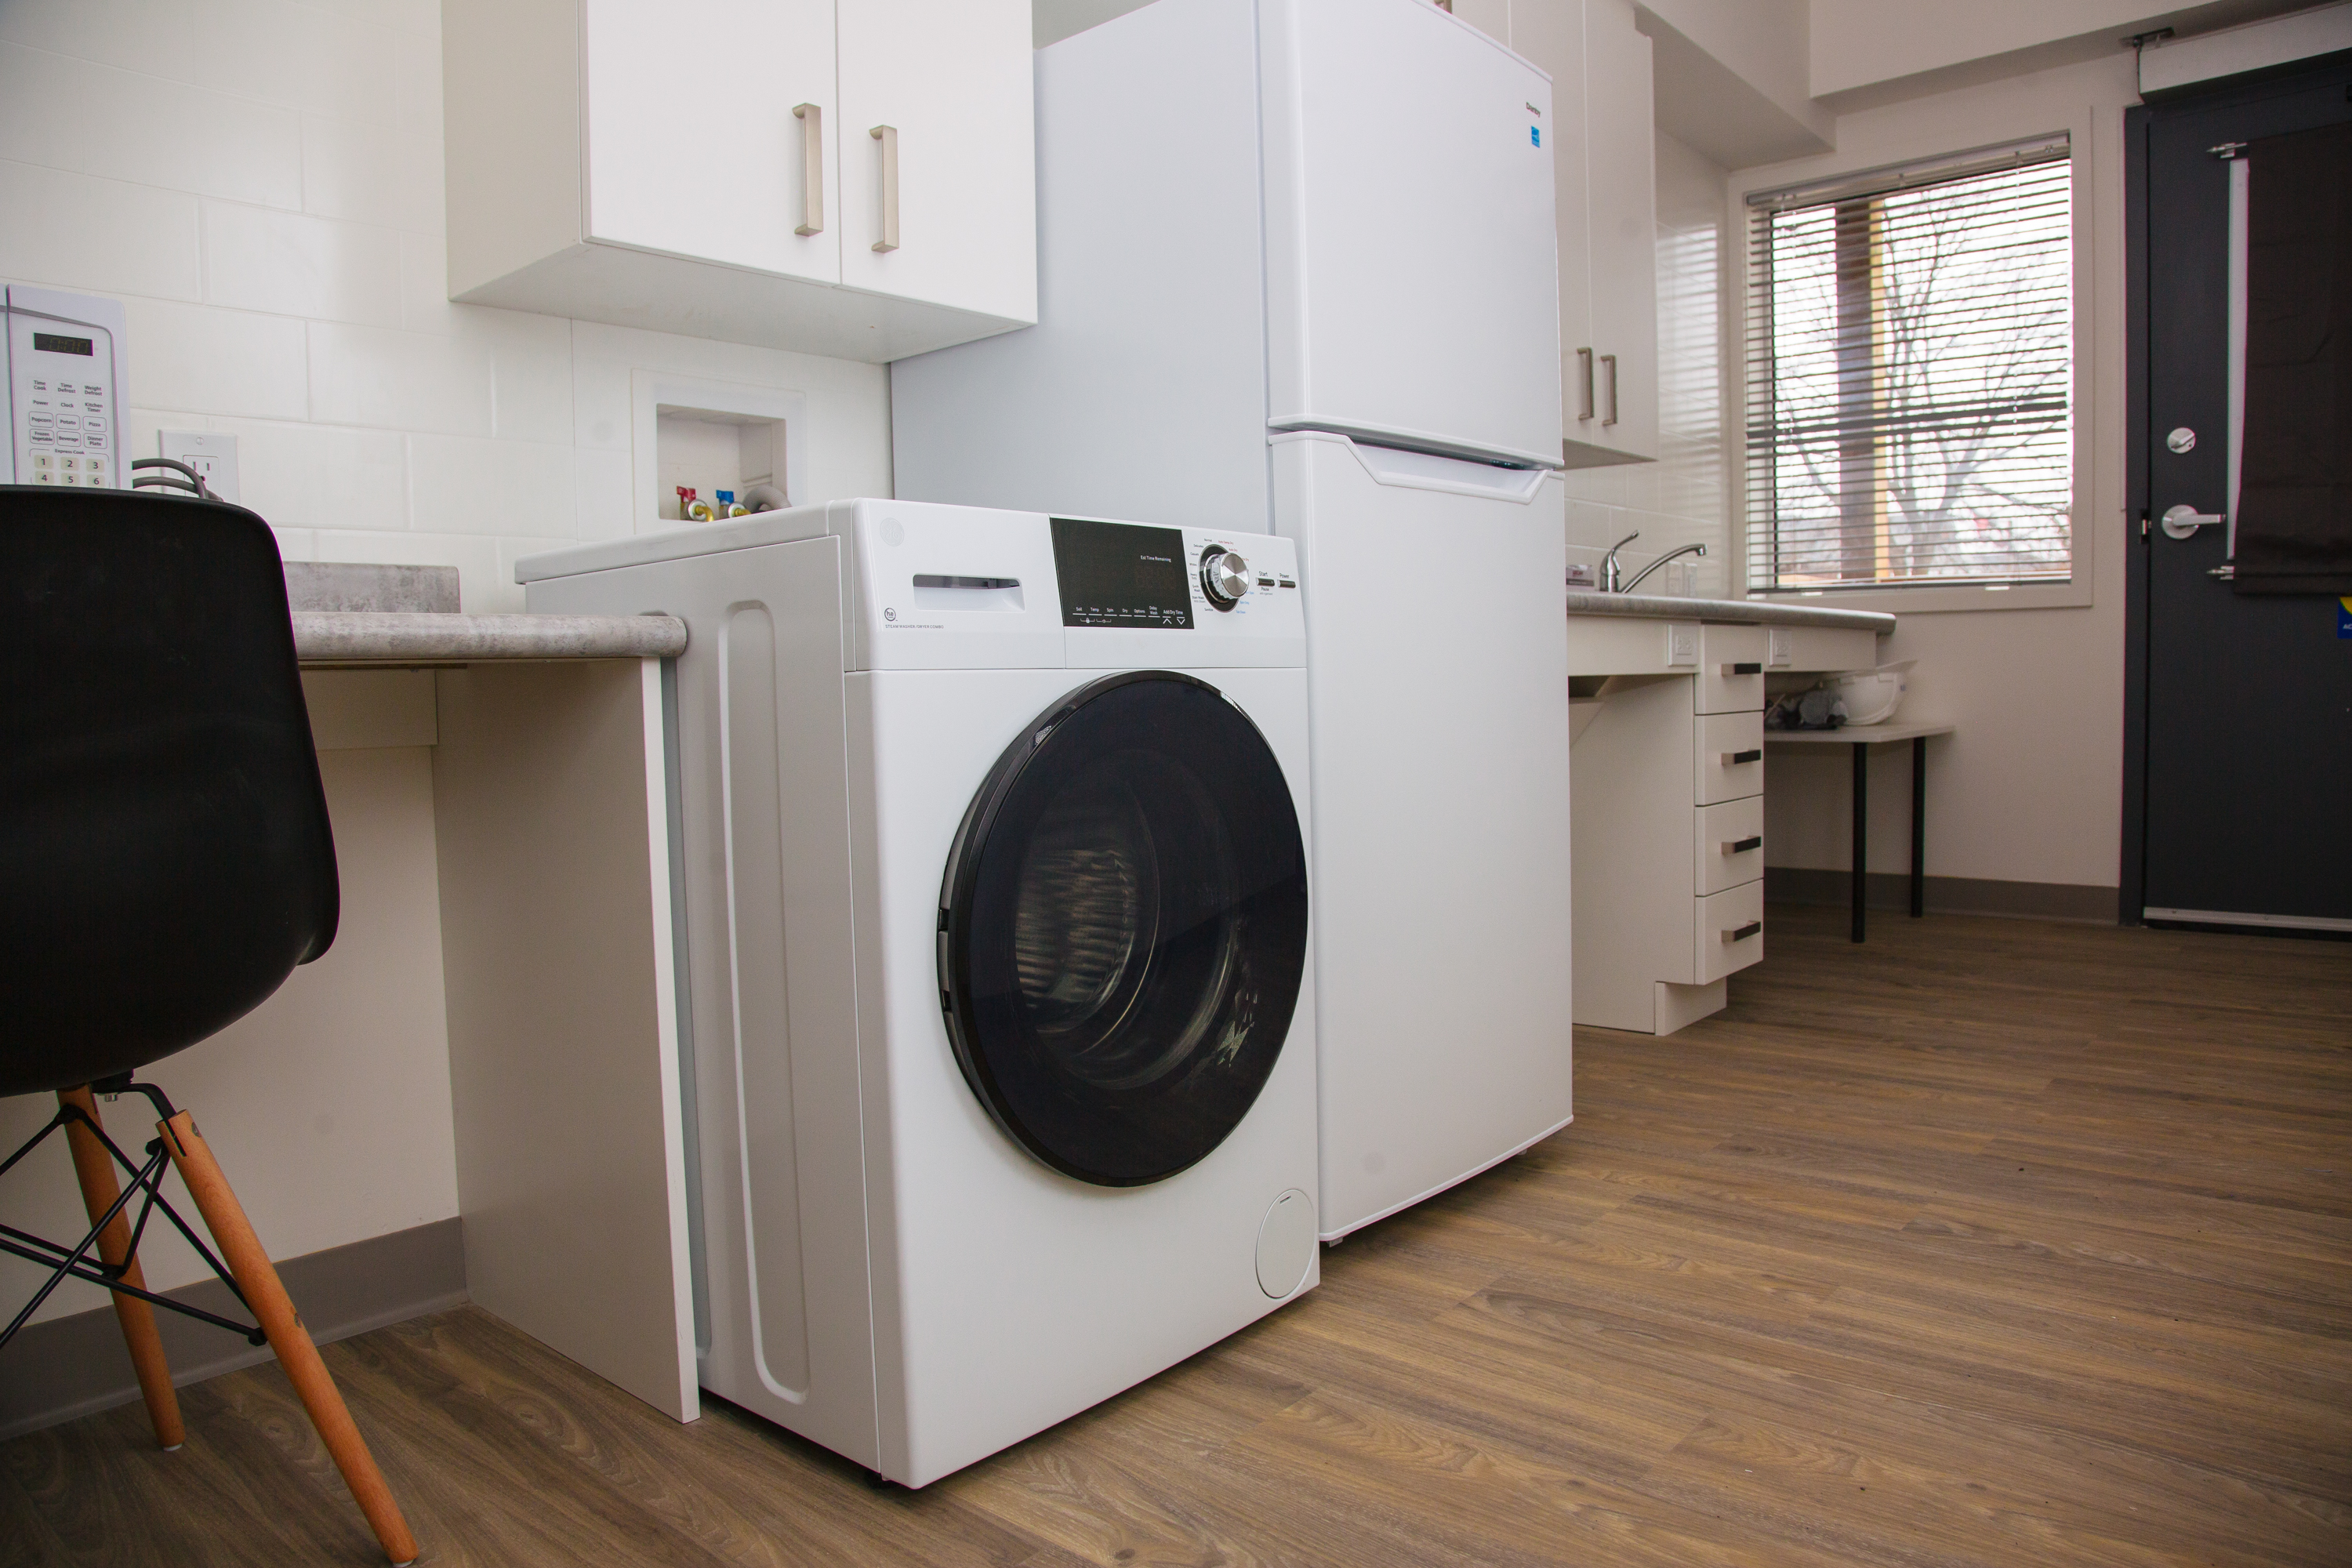 Laundry machine in accessible micro-home unit